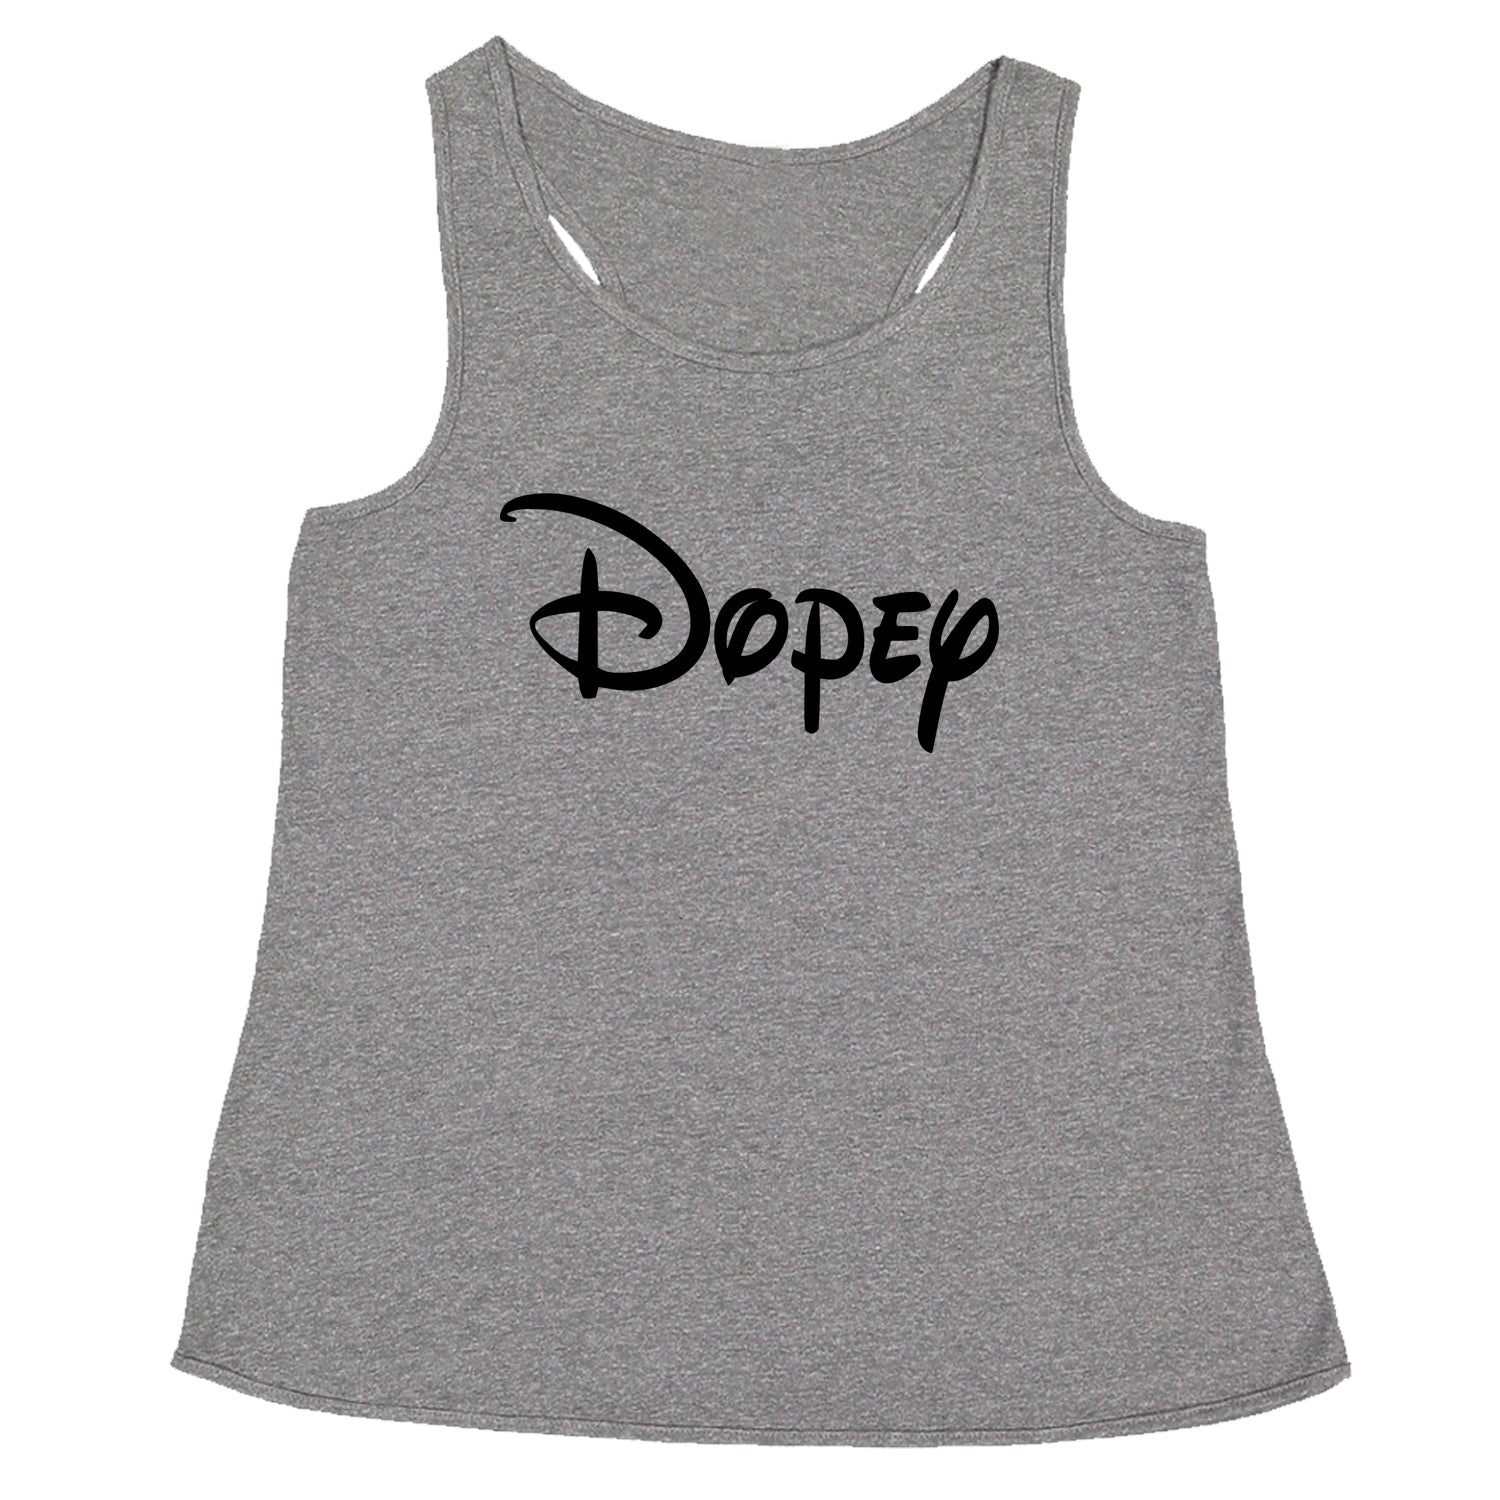 Dopey - 7 Dwarfs Costume Racerback Tank Top for Women and, costume, dwarfs, group, halloween, matching, seven, snow, the, white by Expression Tees